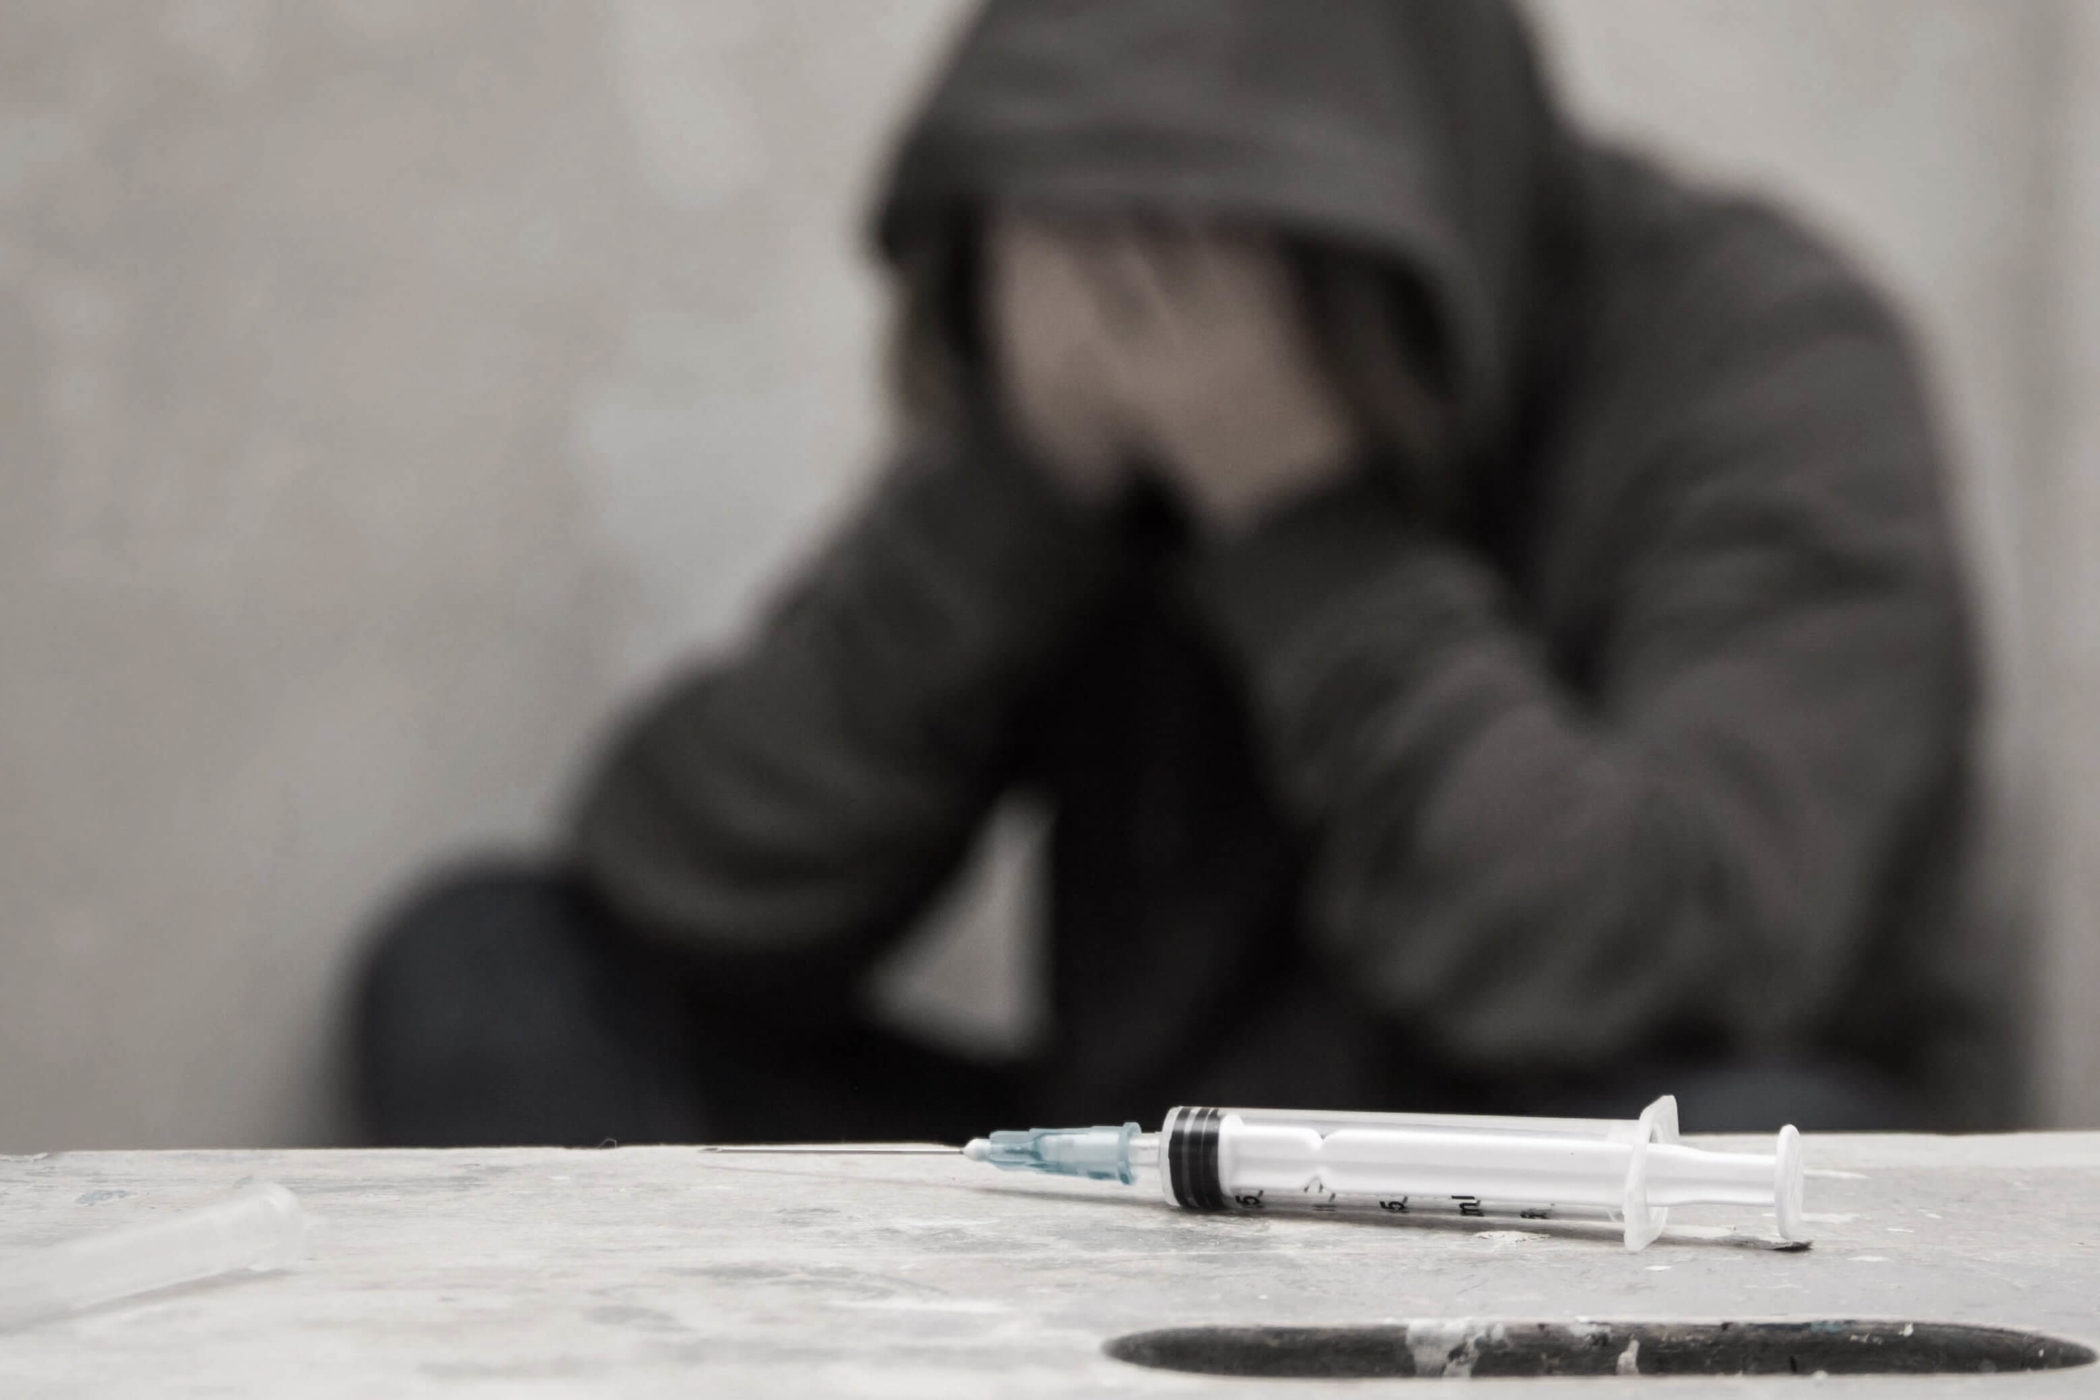 man addicted to using heroin